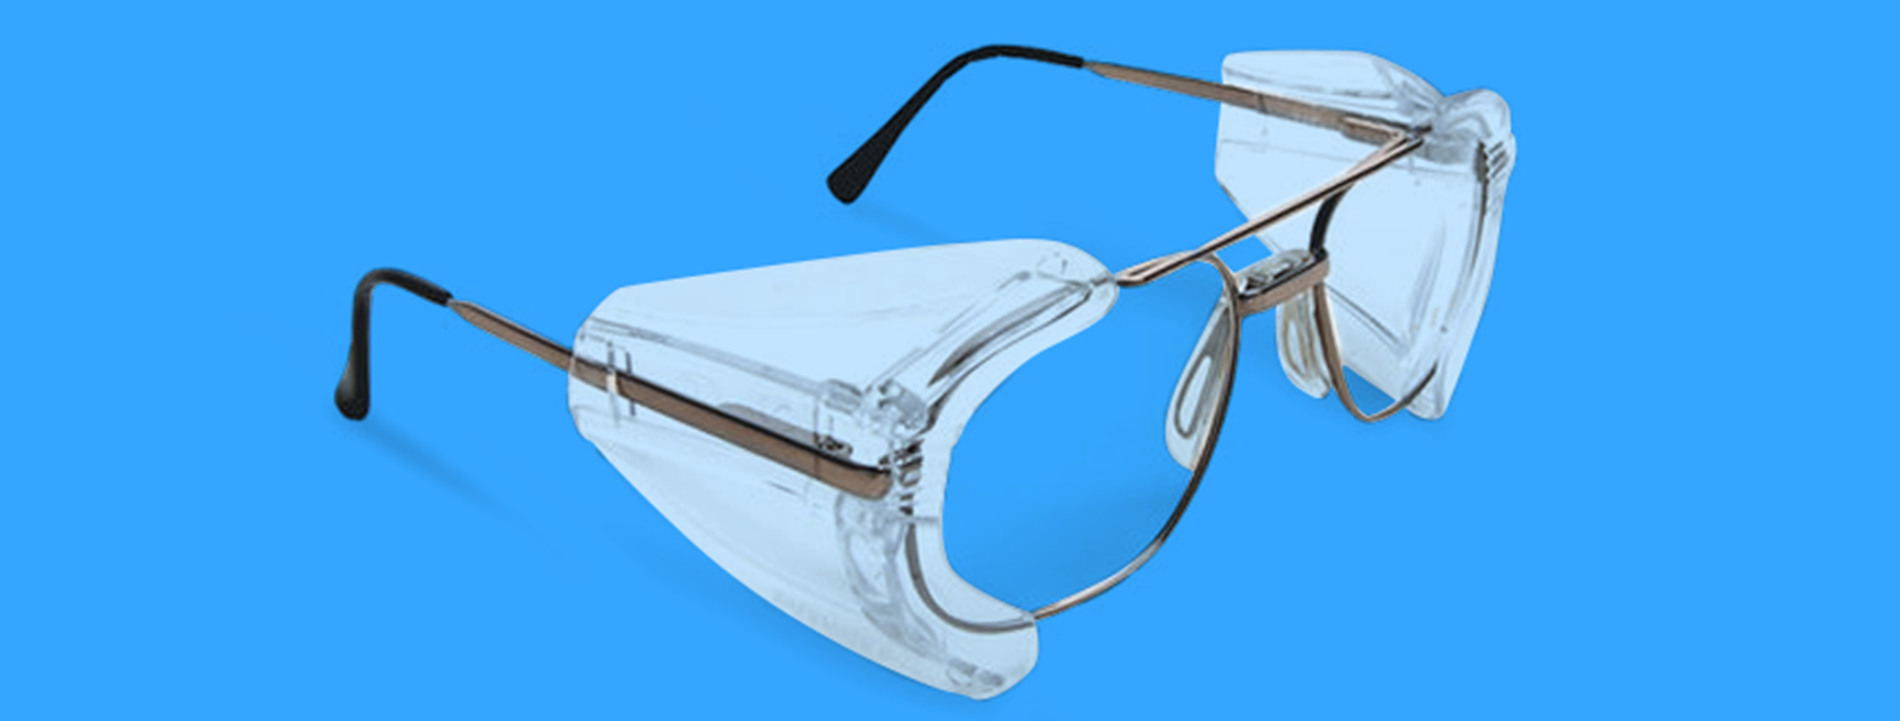 Side Shields Available For Prescription Safety Glasses